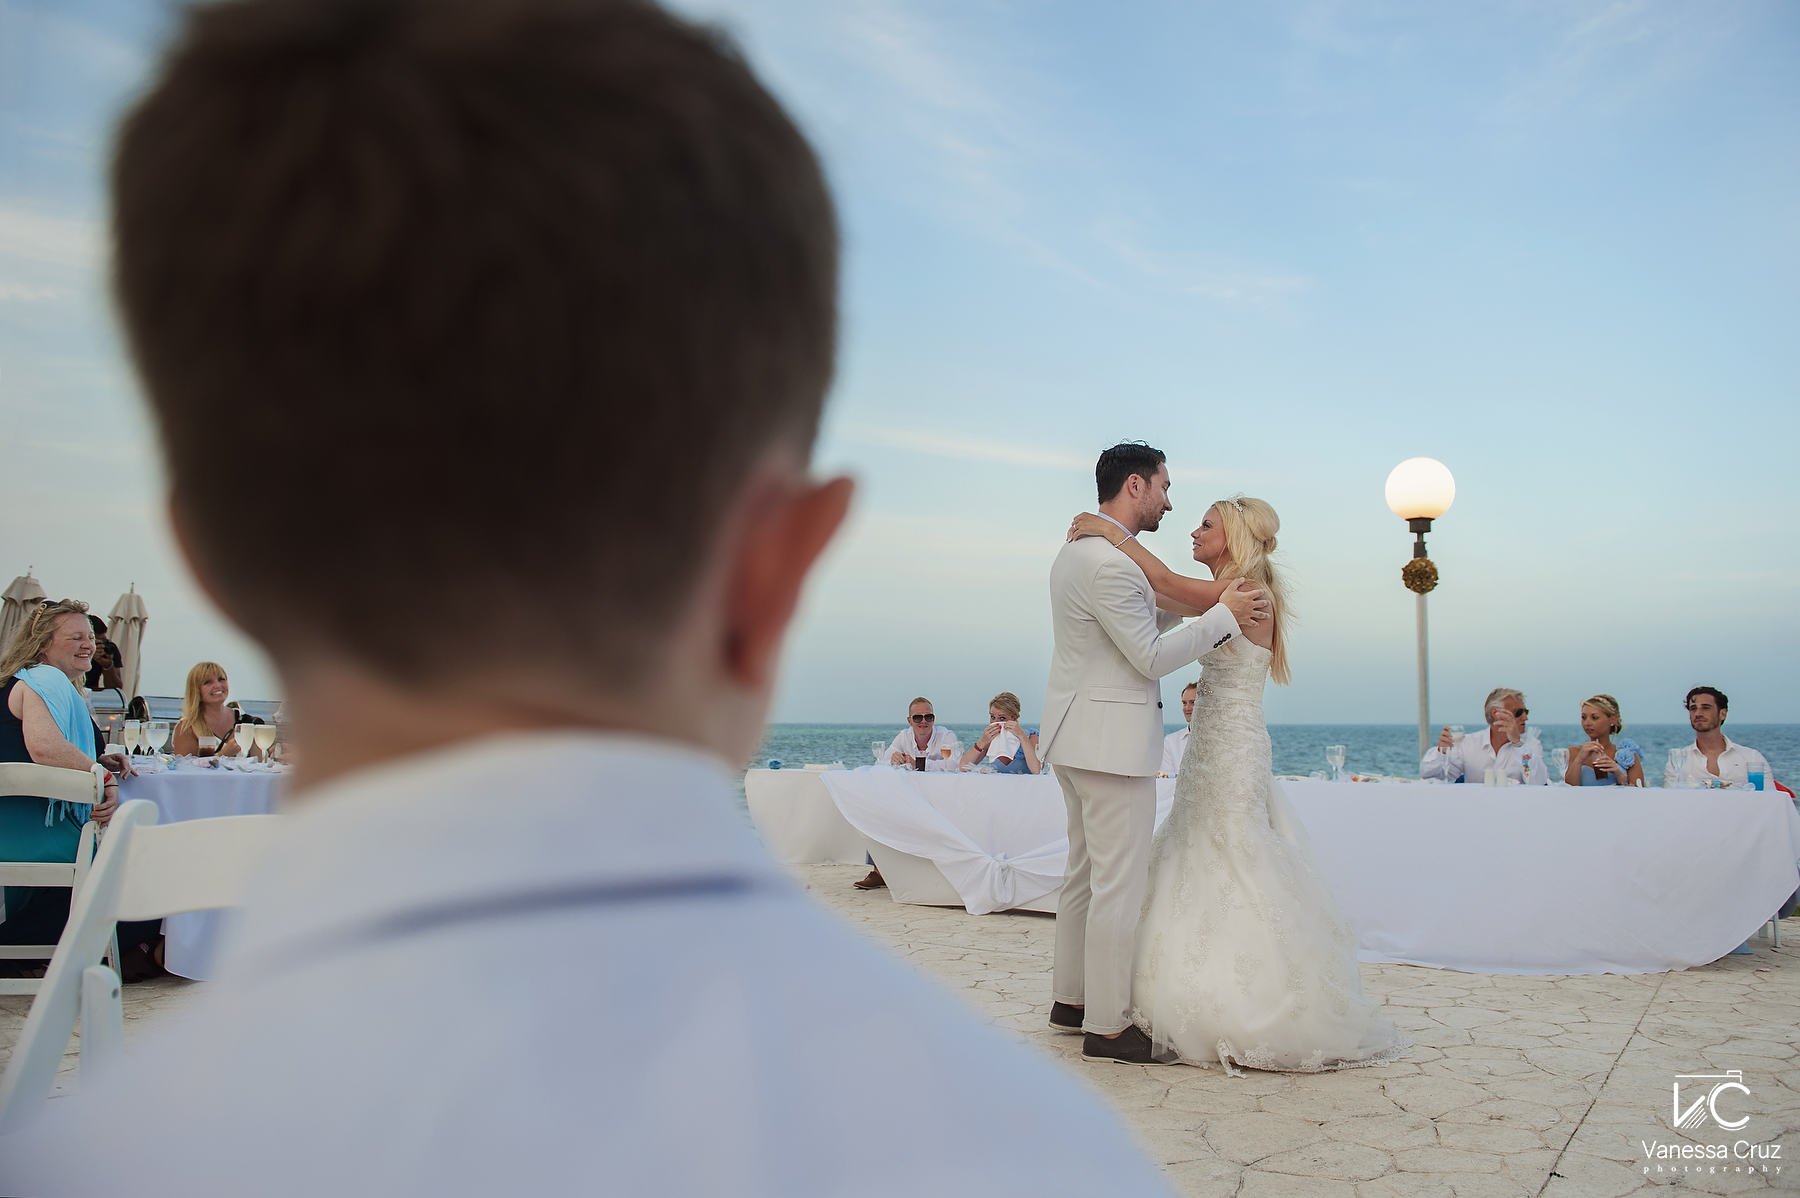 Creative first dance photography Moon Palace Cancun Mexico